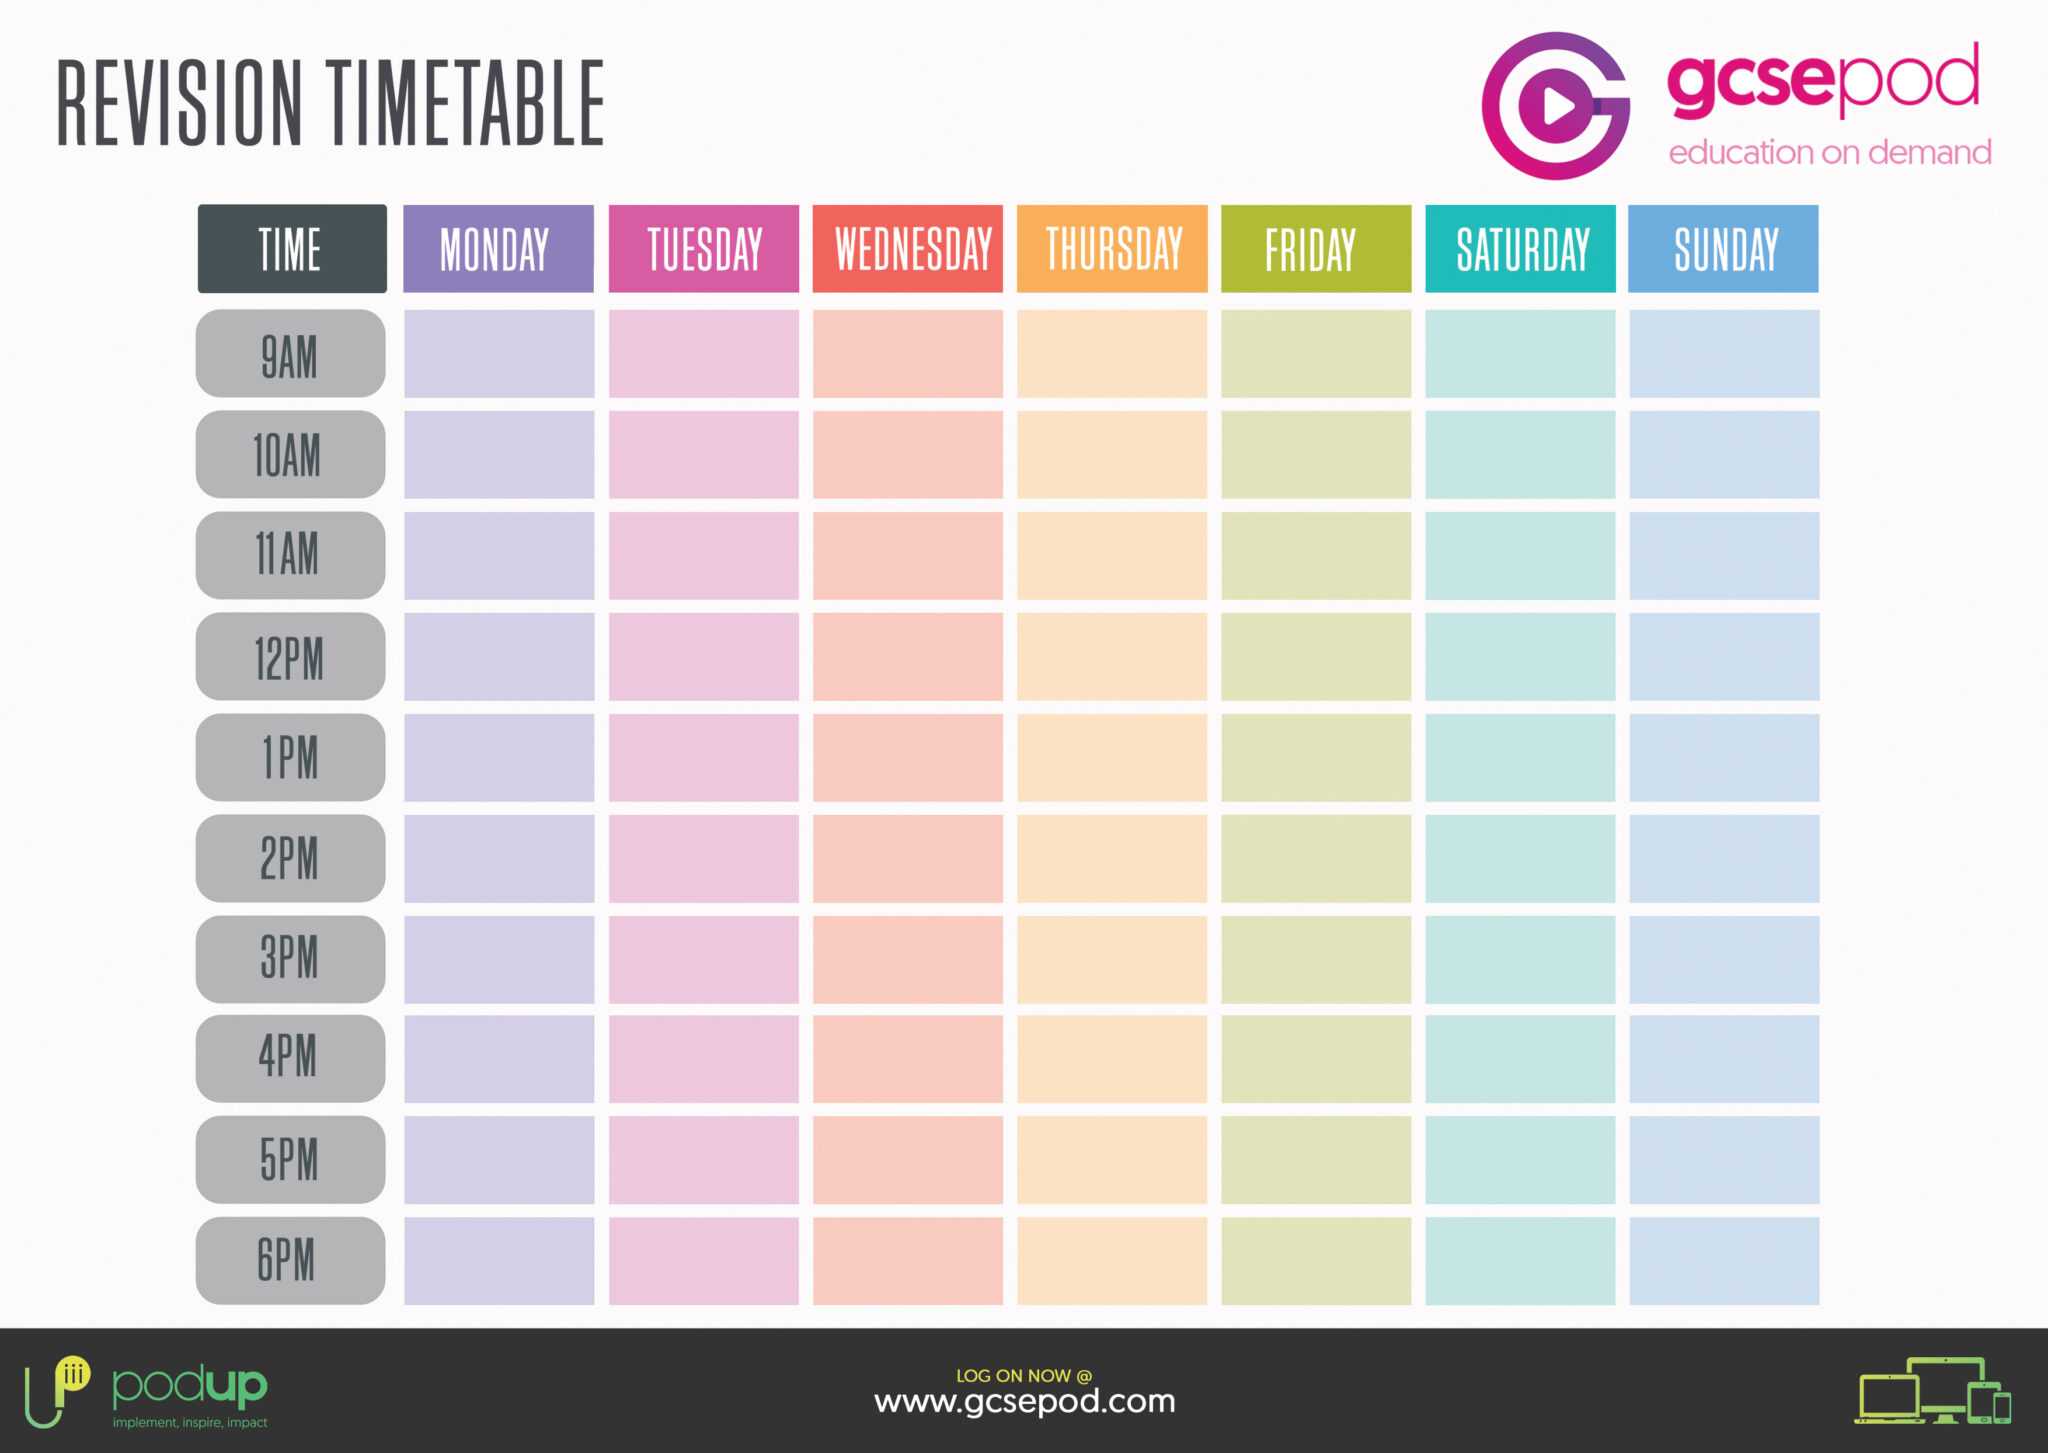 student-resources-gcsepod-pertaining-to-blank-revision-timetable-template